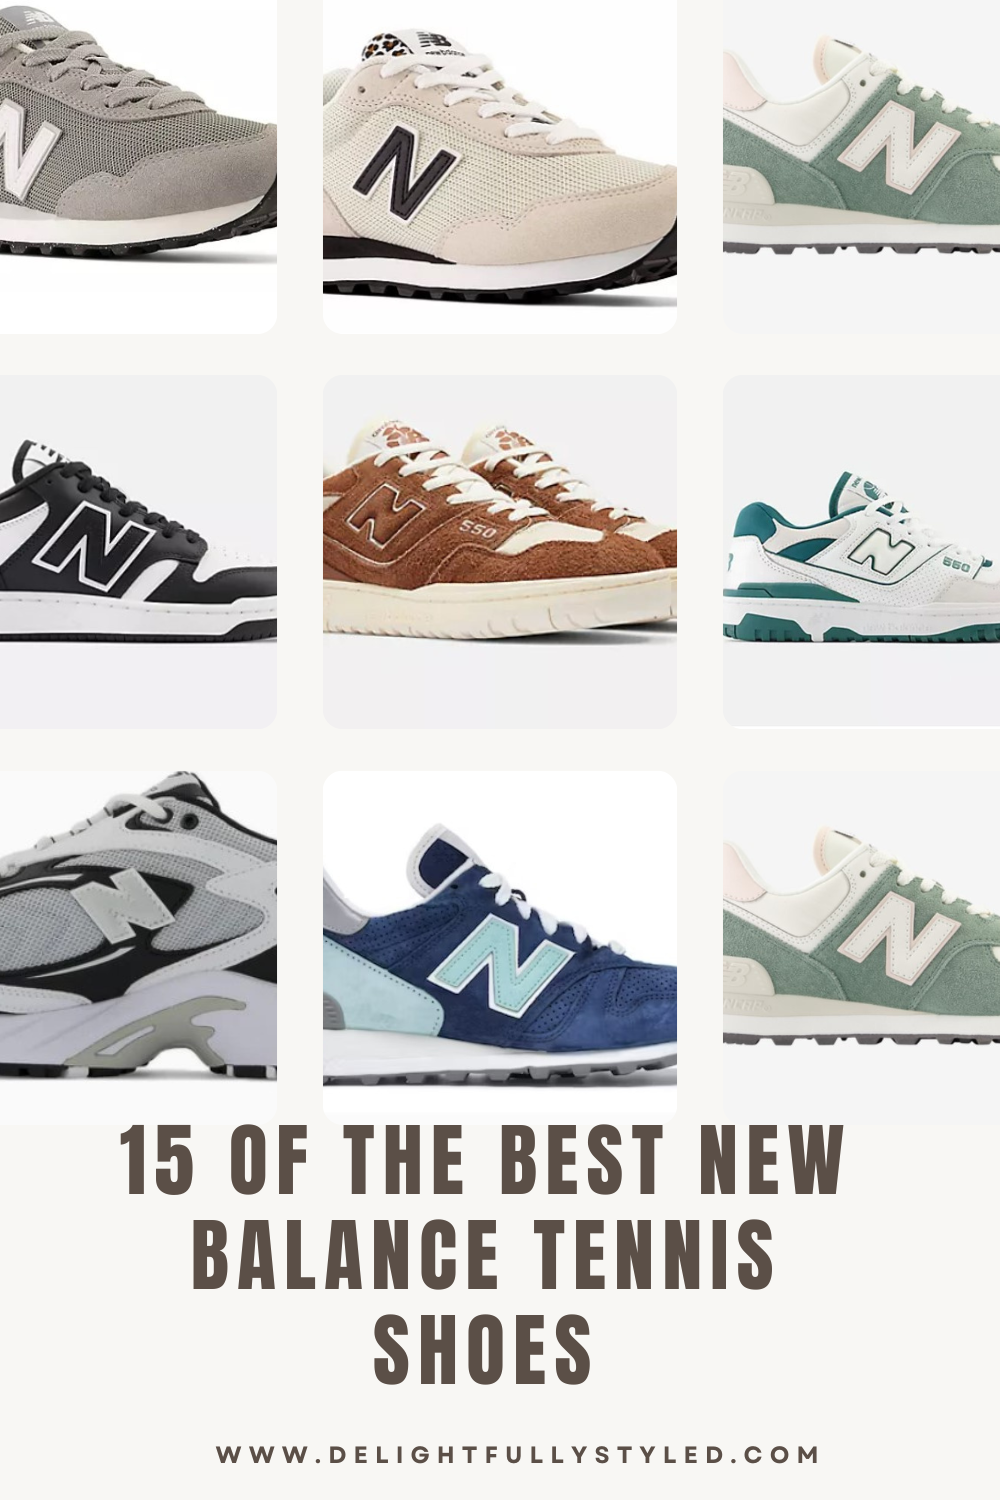 New Balance: Taking Your Footwear Game To The Next Level With